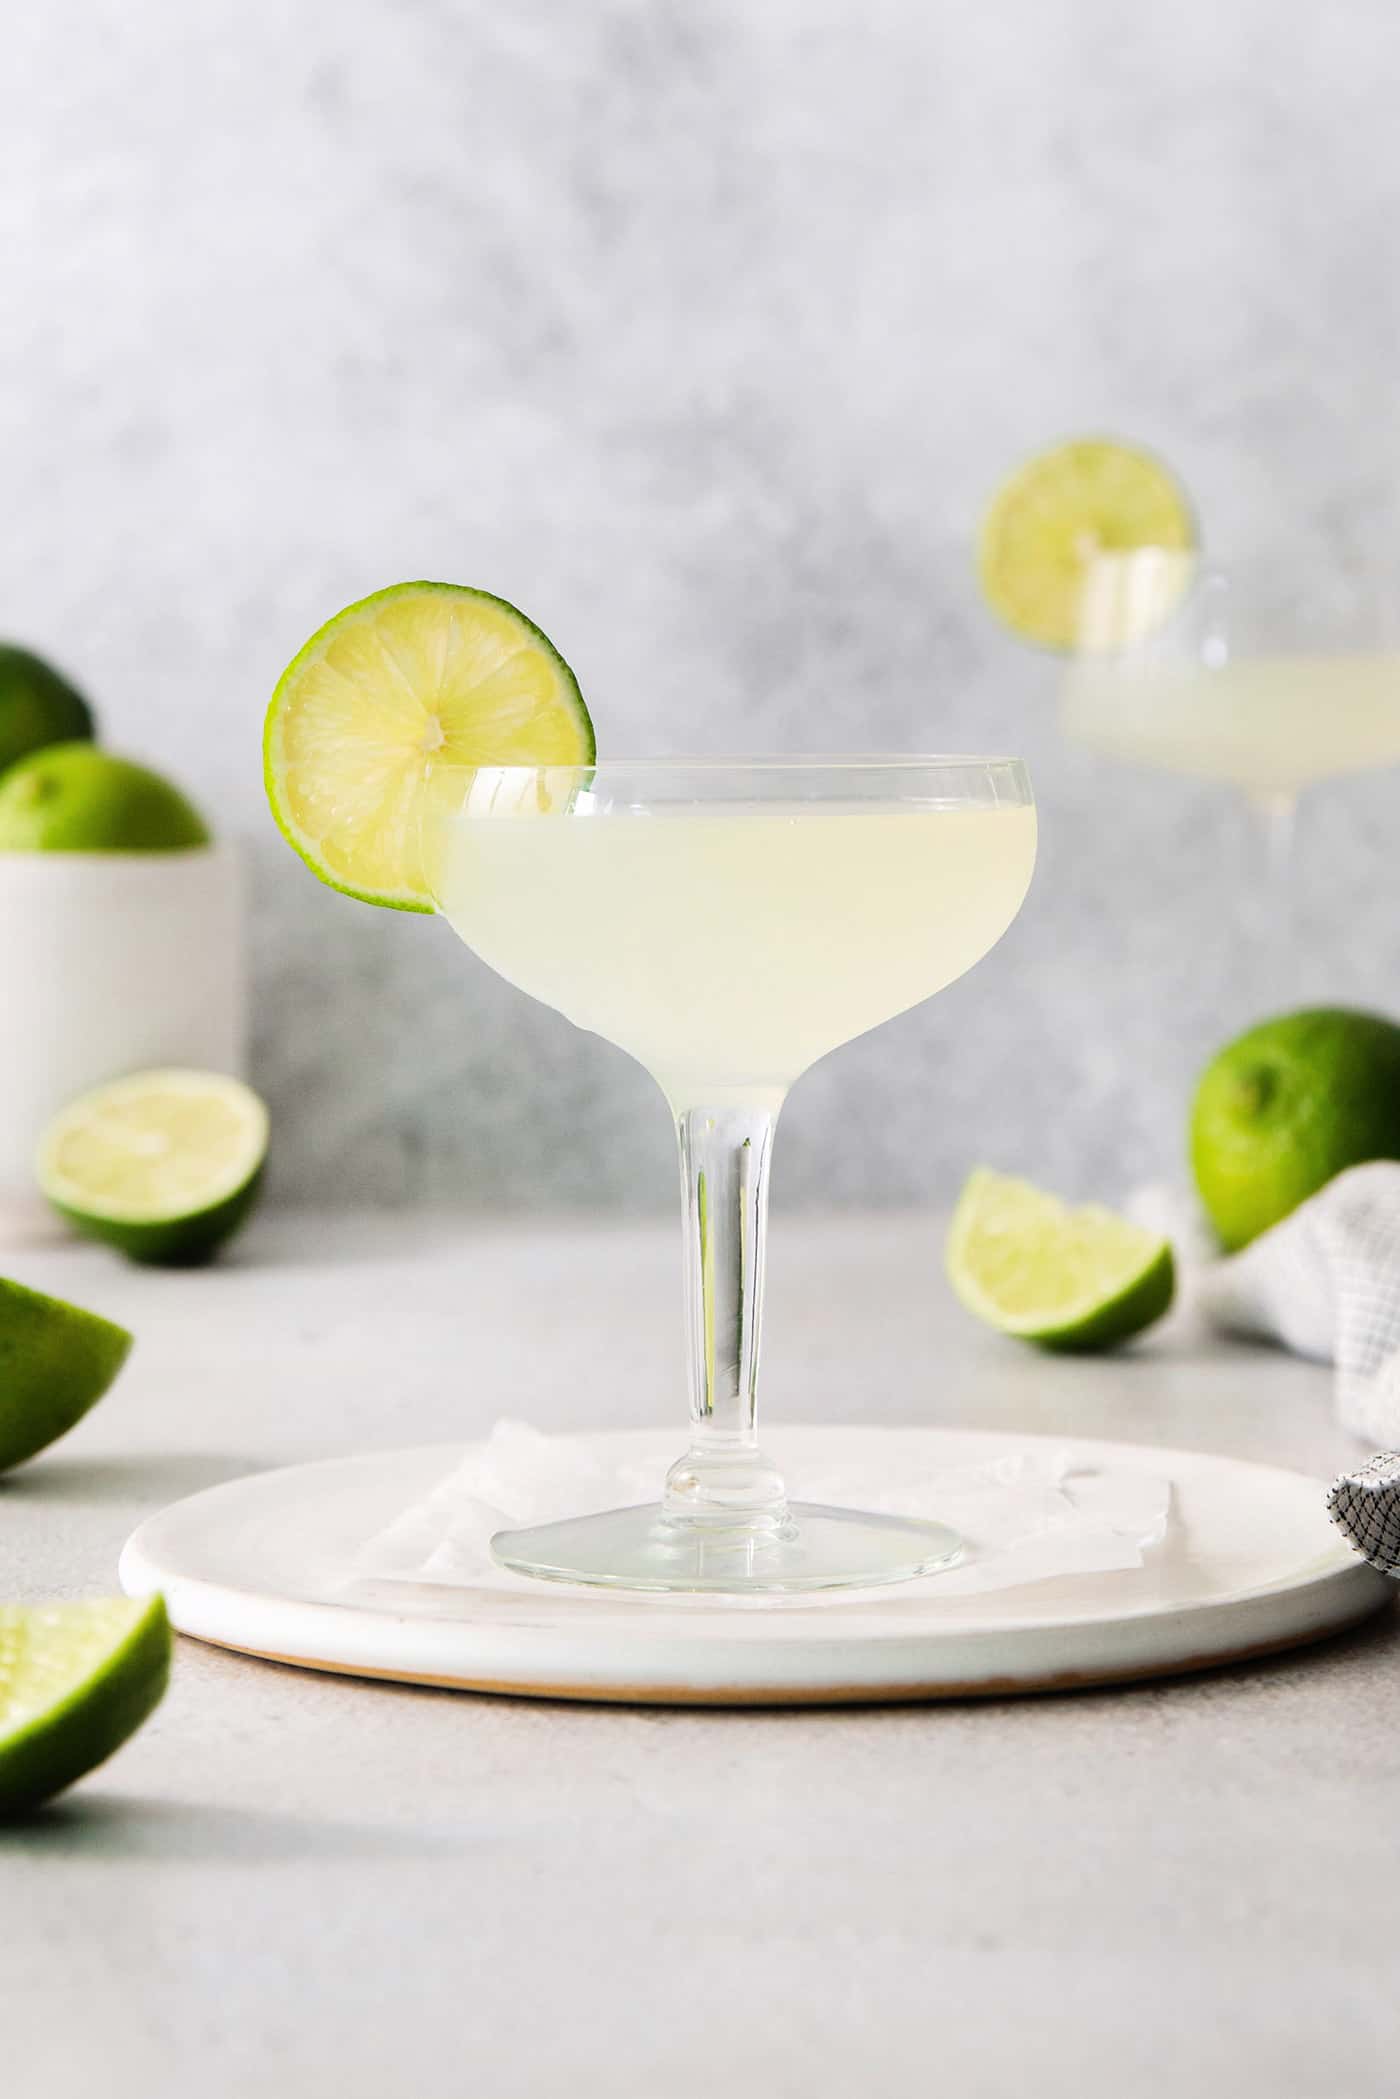 A classic daiquiri cocktail garnished with a lime